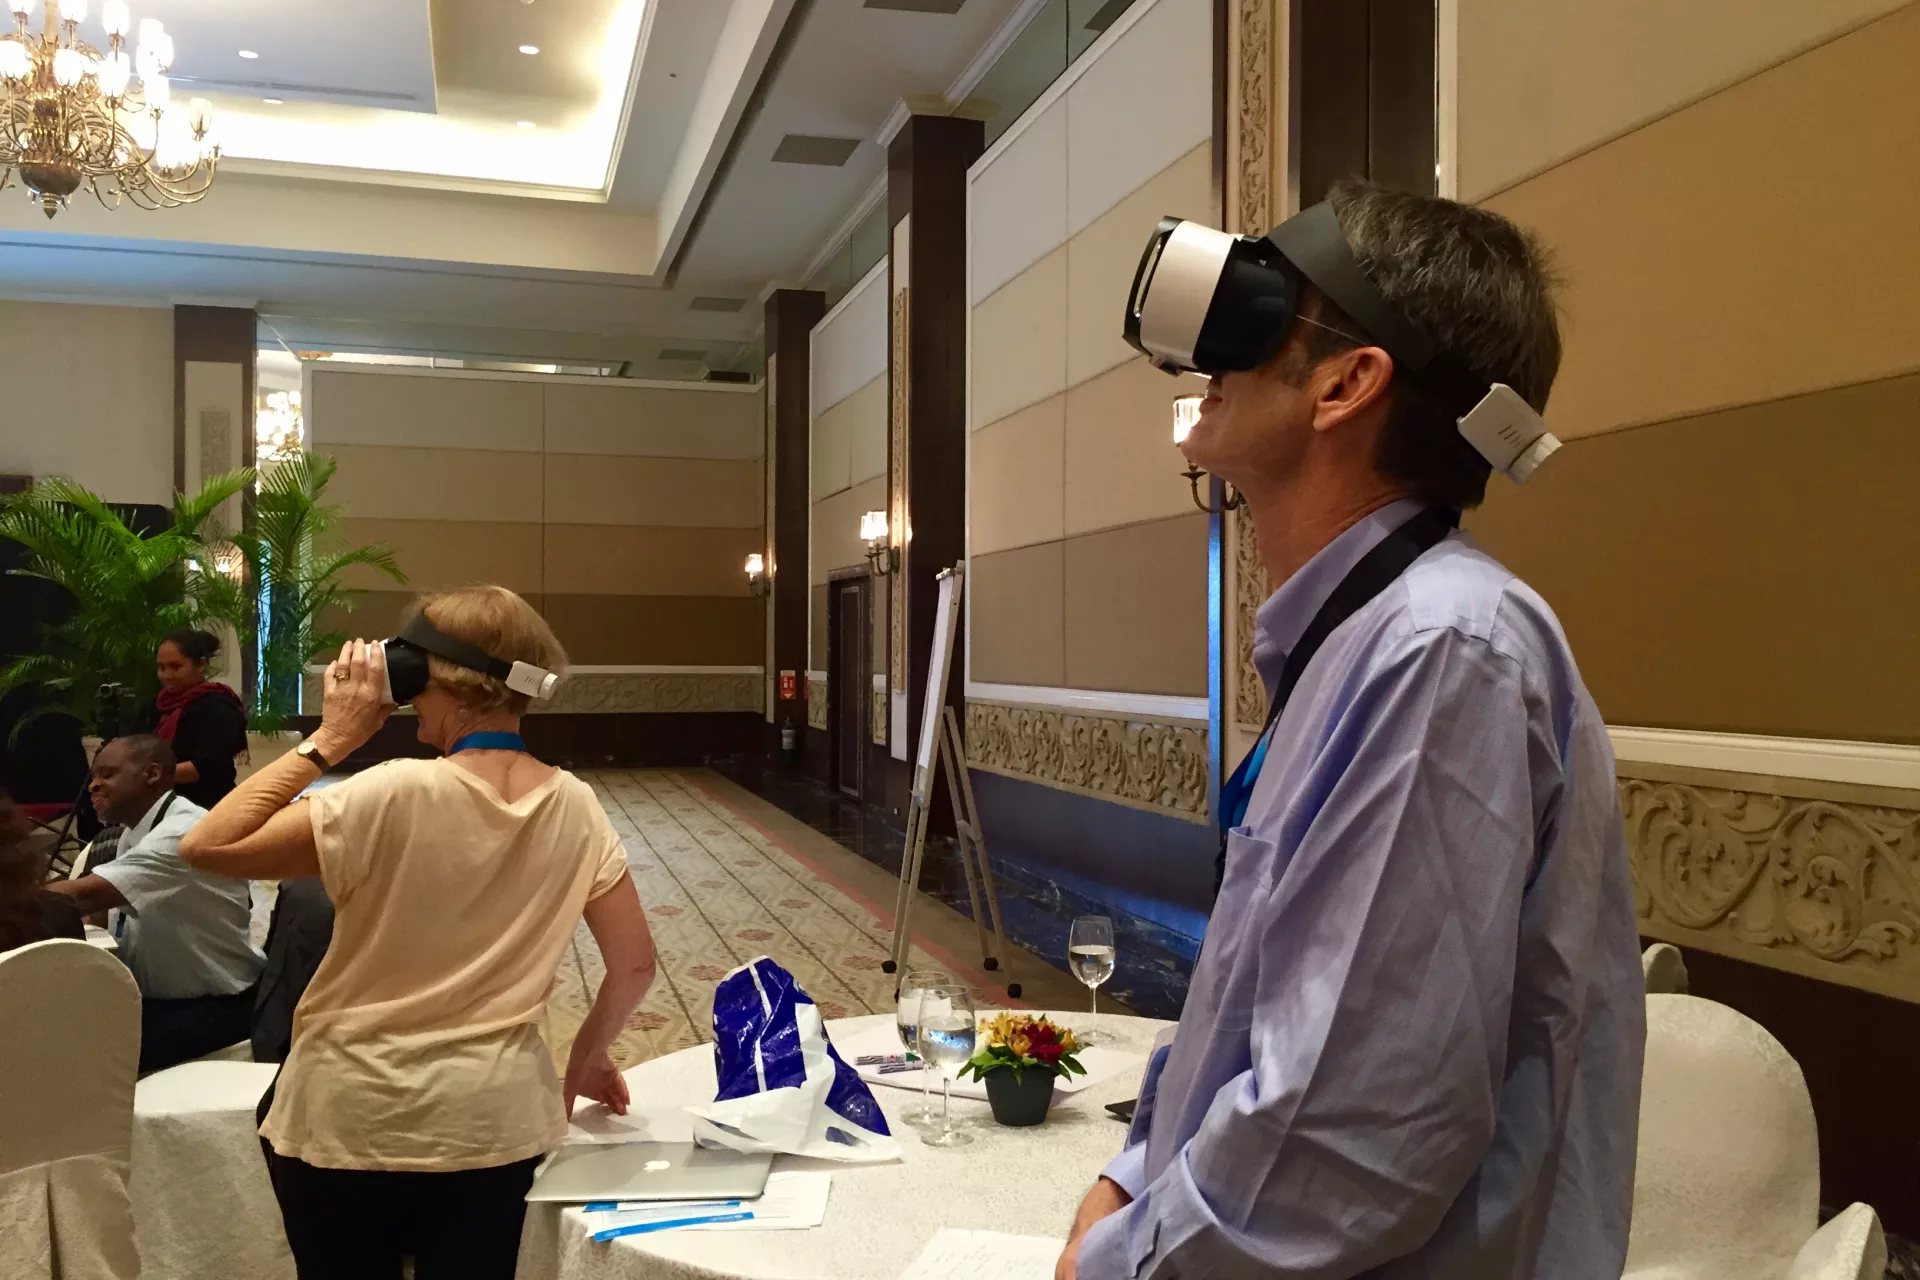 At the parenting support intervention workshop, participants try UNICEF China's virtual reality devices which show the barefoot social worker and ECD center pilots (L-R: Glen Palmer, International ECD Expert and Stephen Blight, UNICEF Regional Child Protection Advisor)